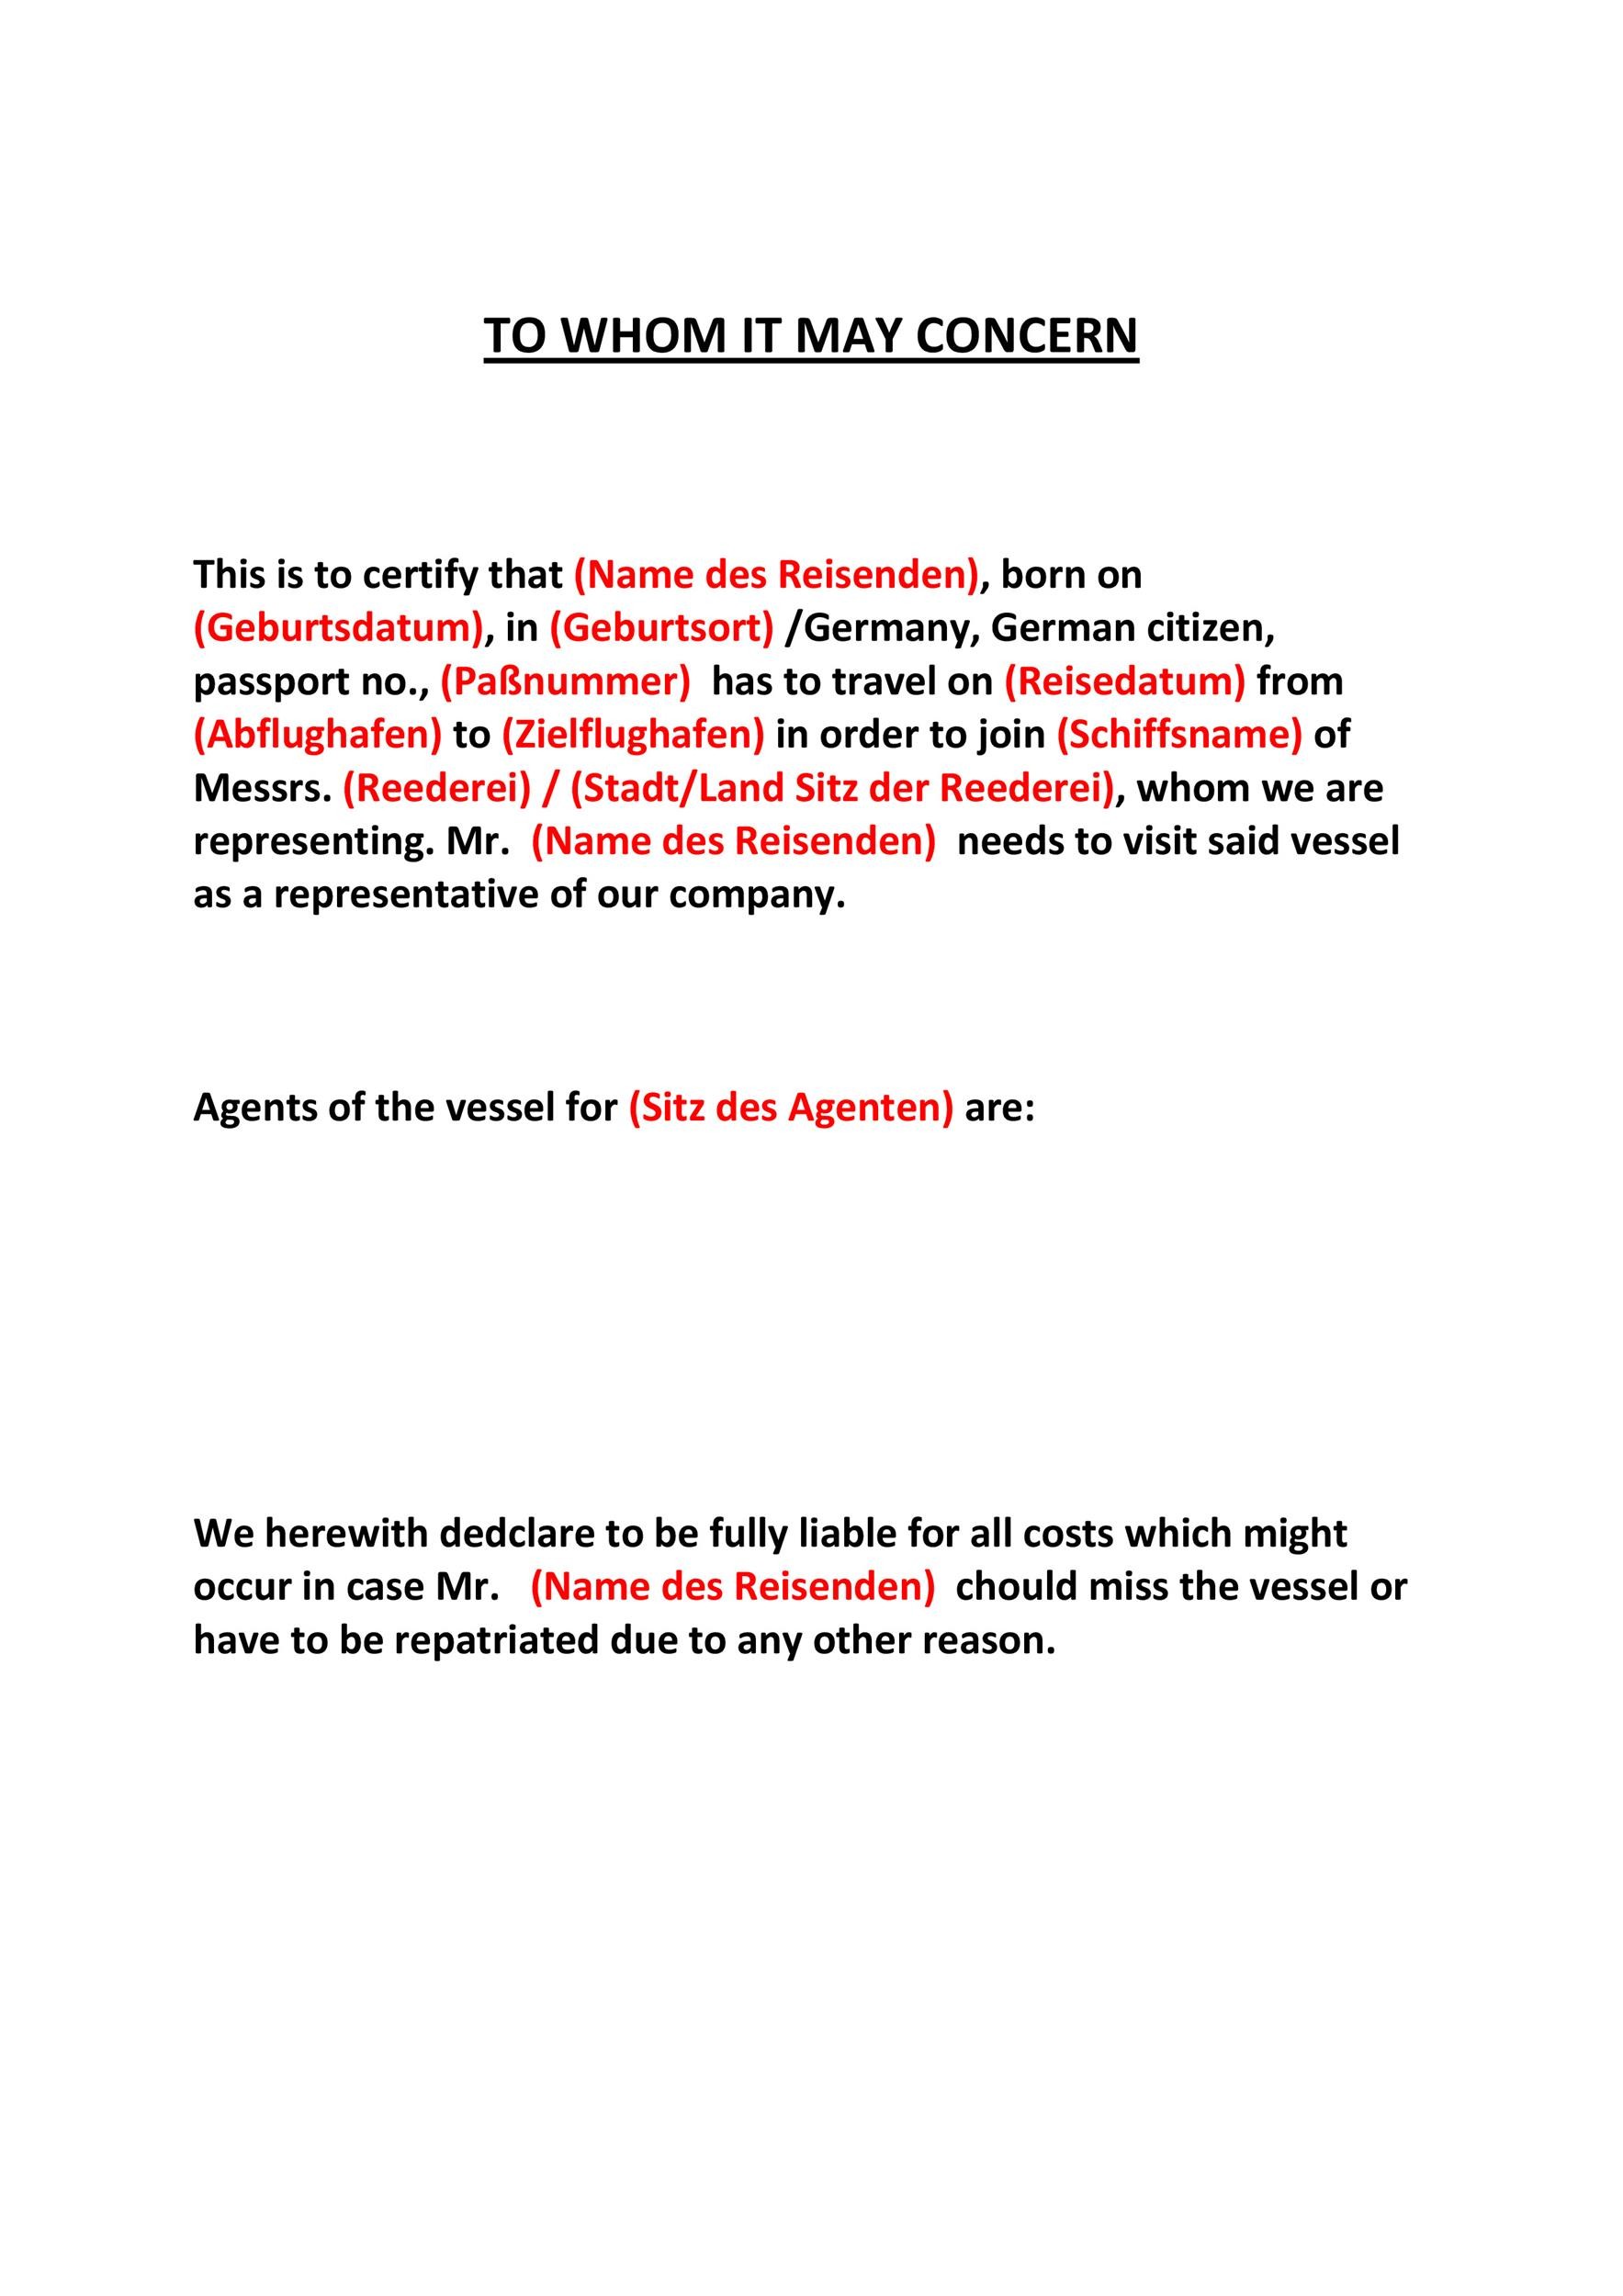 To Whom It May Concern Capitalization Cover Letter from templatelab.com